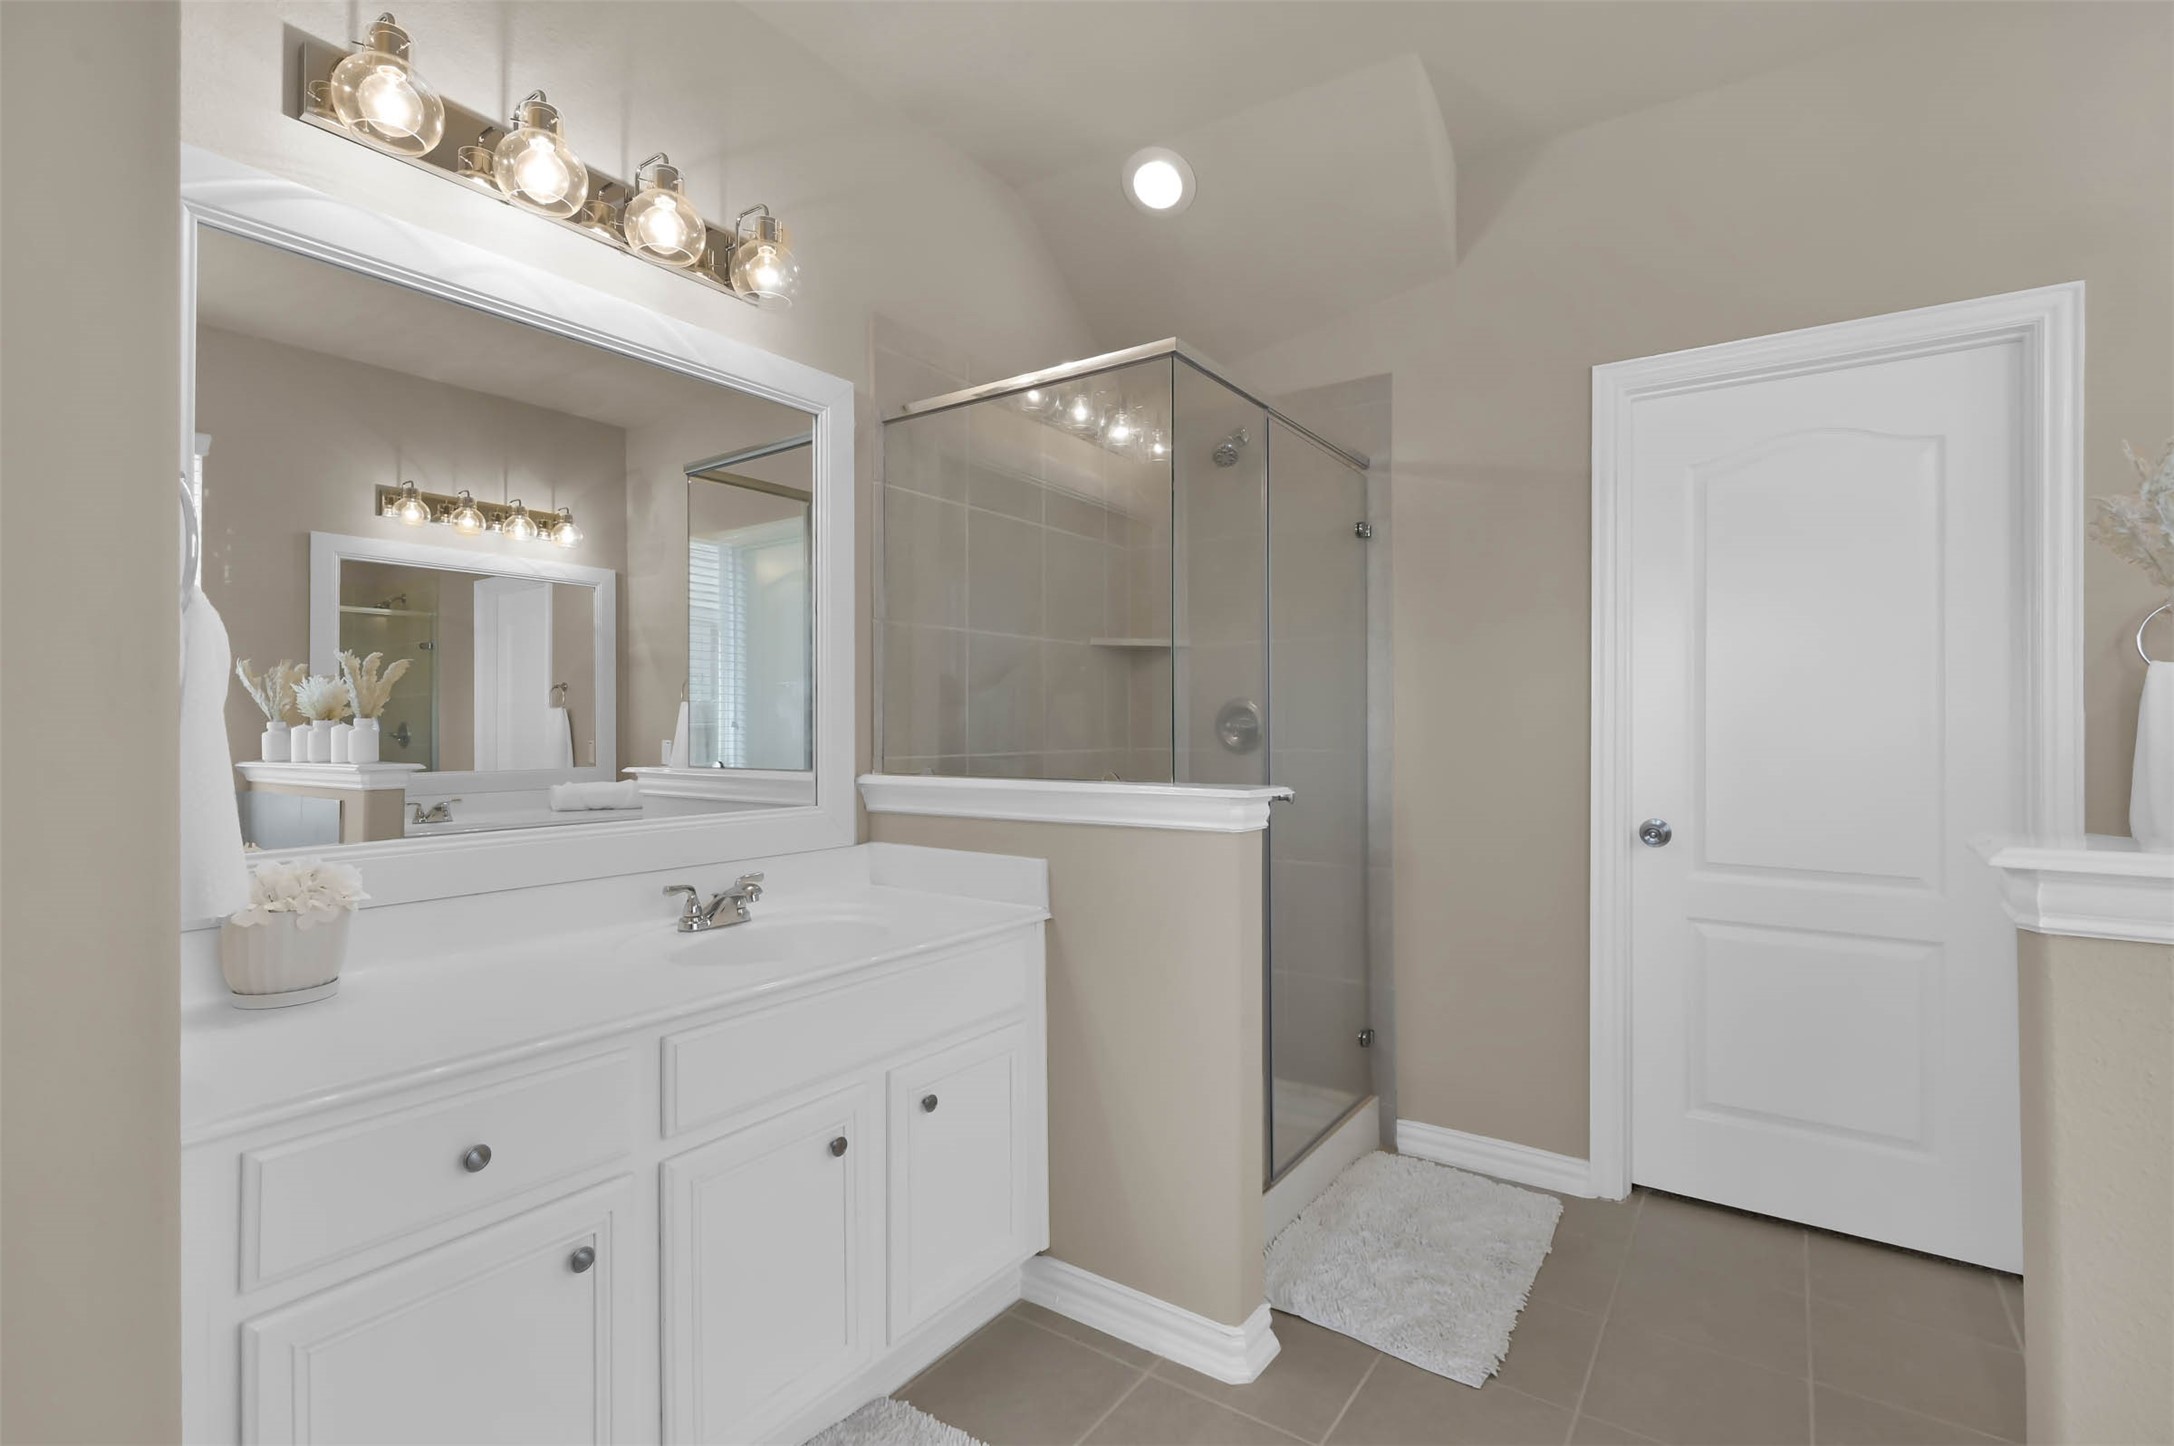 With a beautiful ensuite that offers separate vanities for those hectic morning routines.